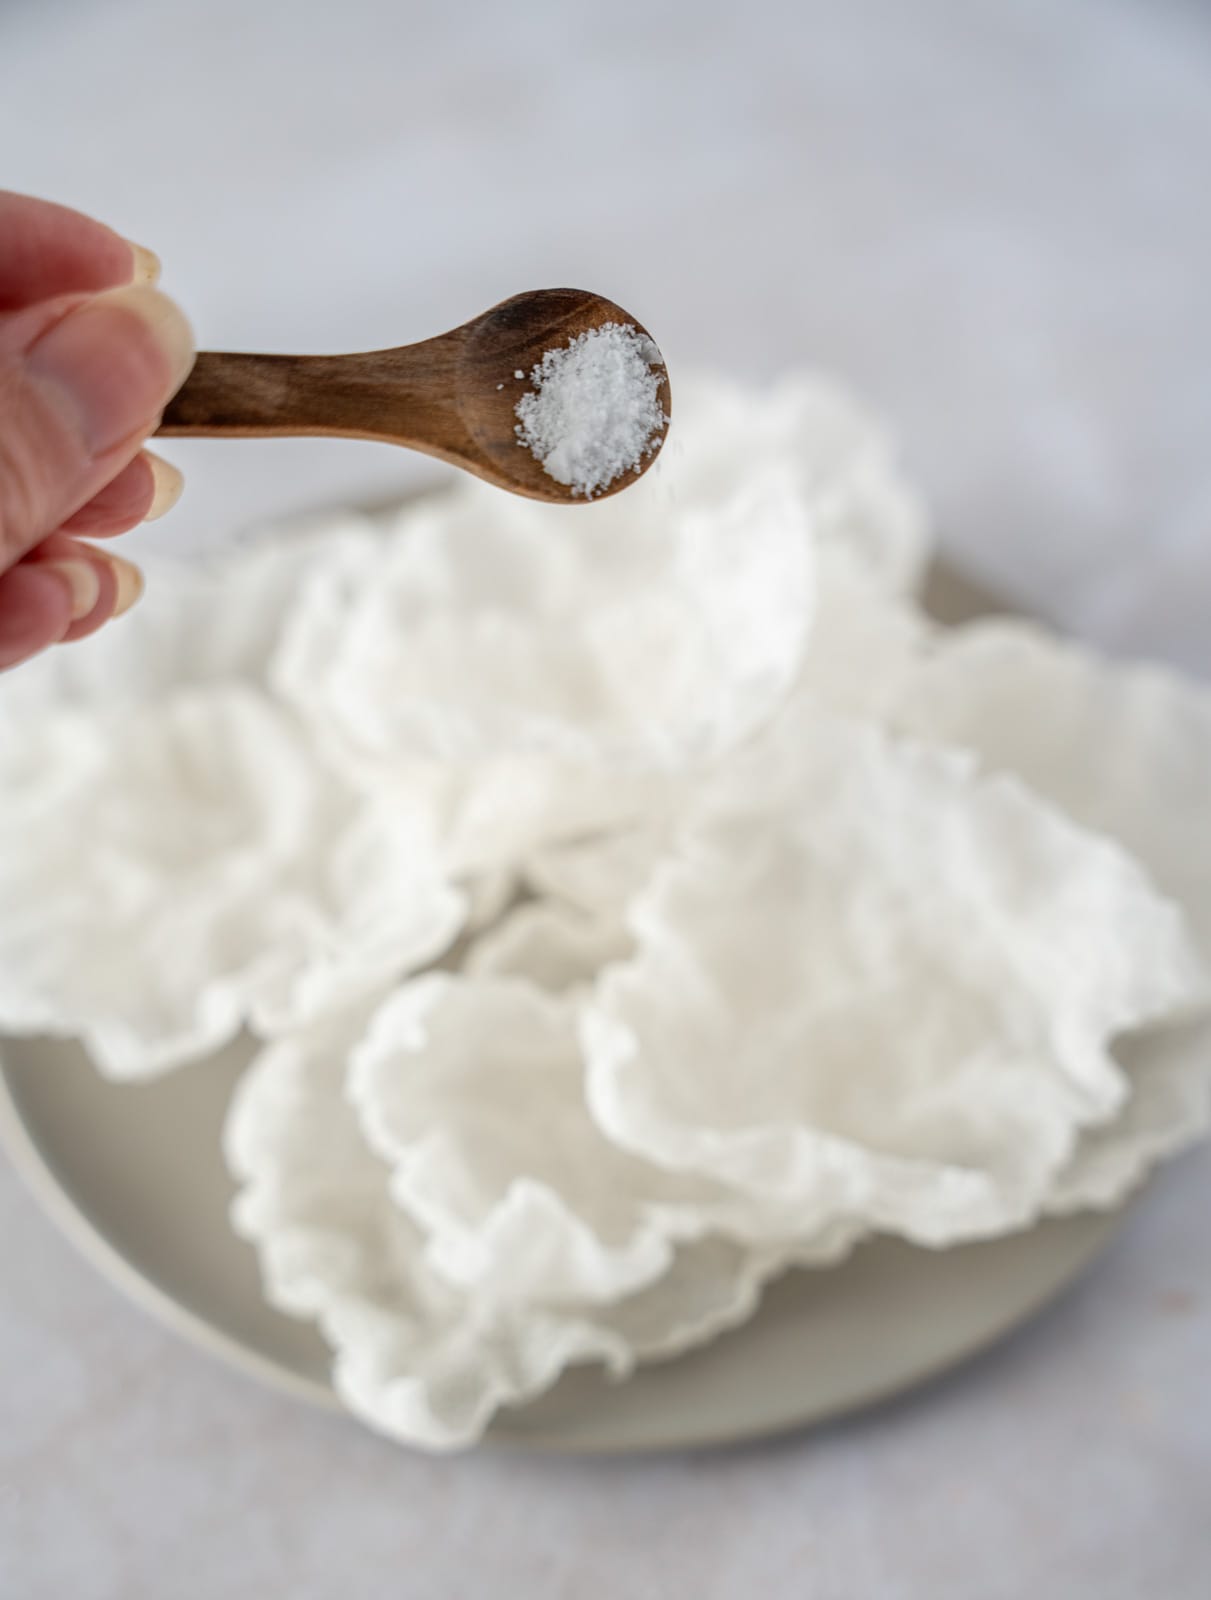 Salt on a wooden spoon being sprinkled onto fried rice paper chips.